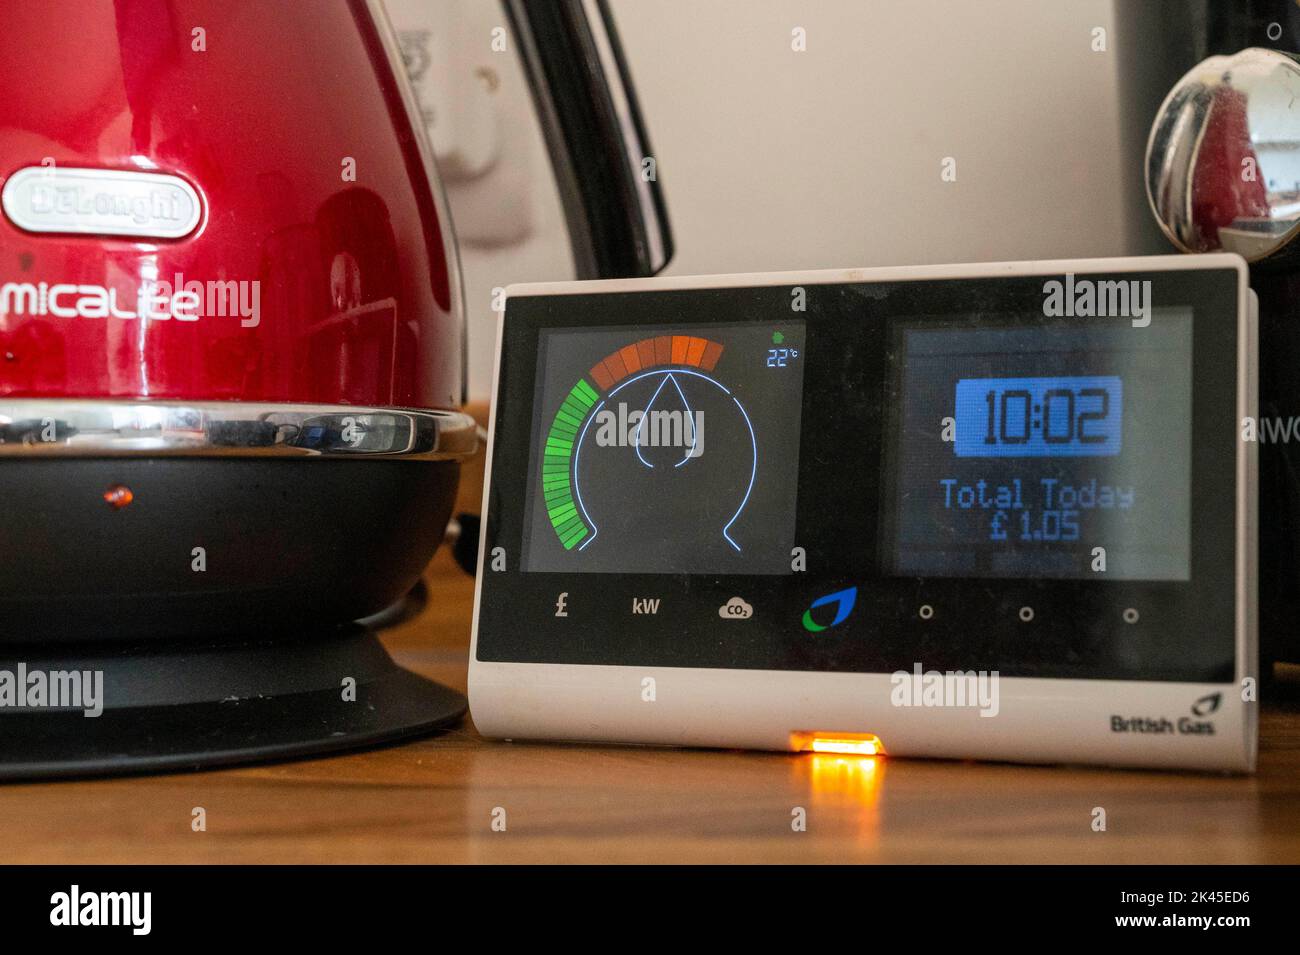 British Gas smart meter showing amount of electricity being used while boiling a kettle UK Stock Photo